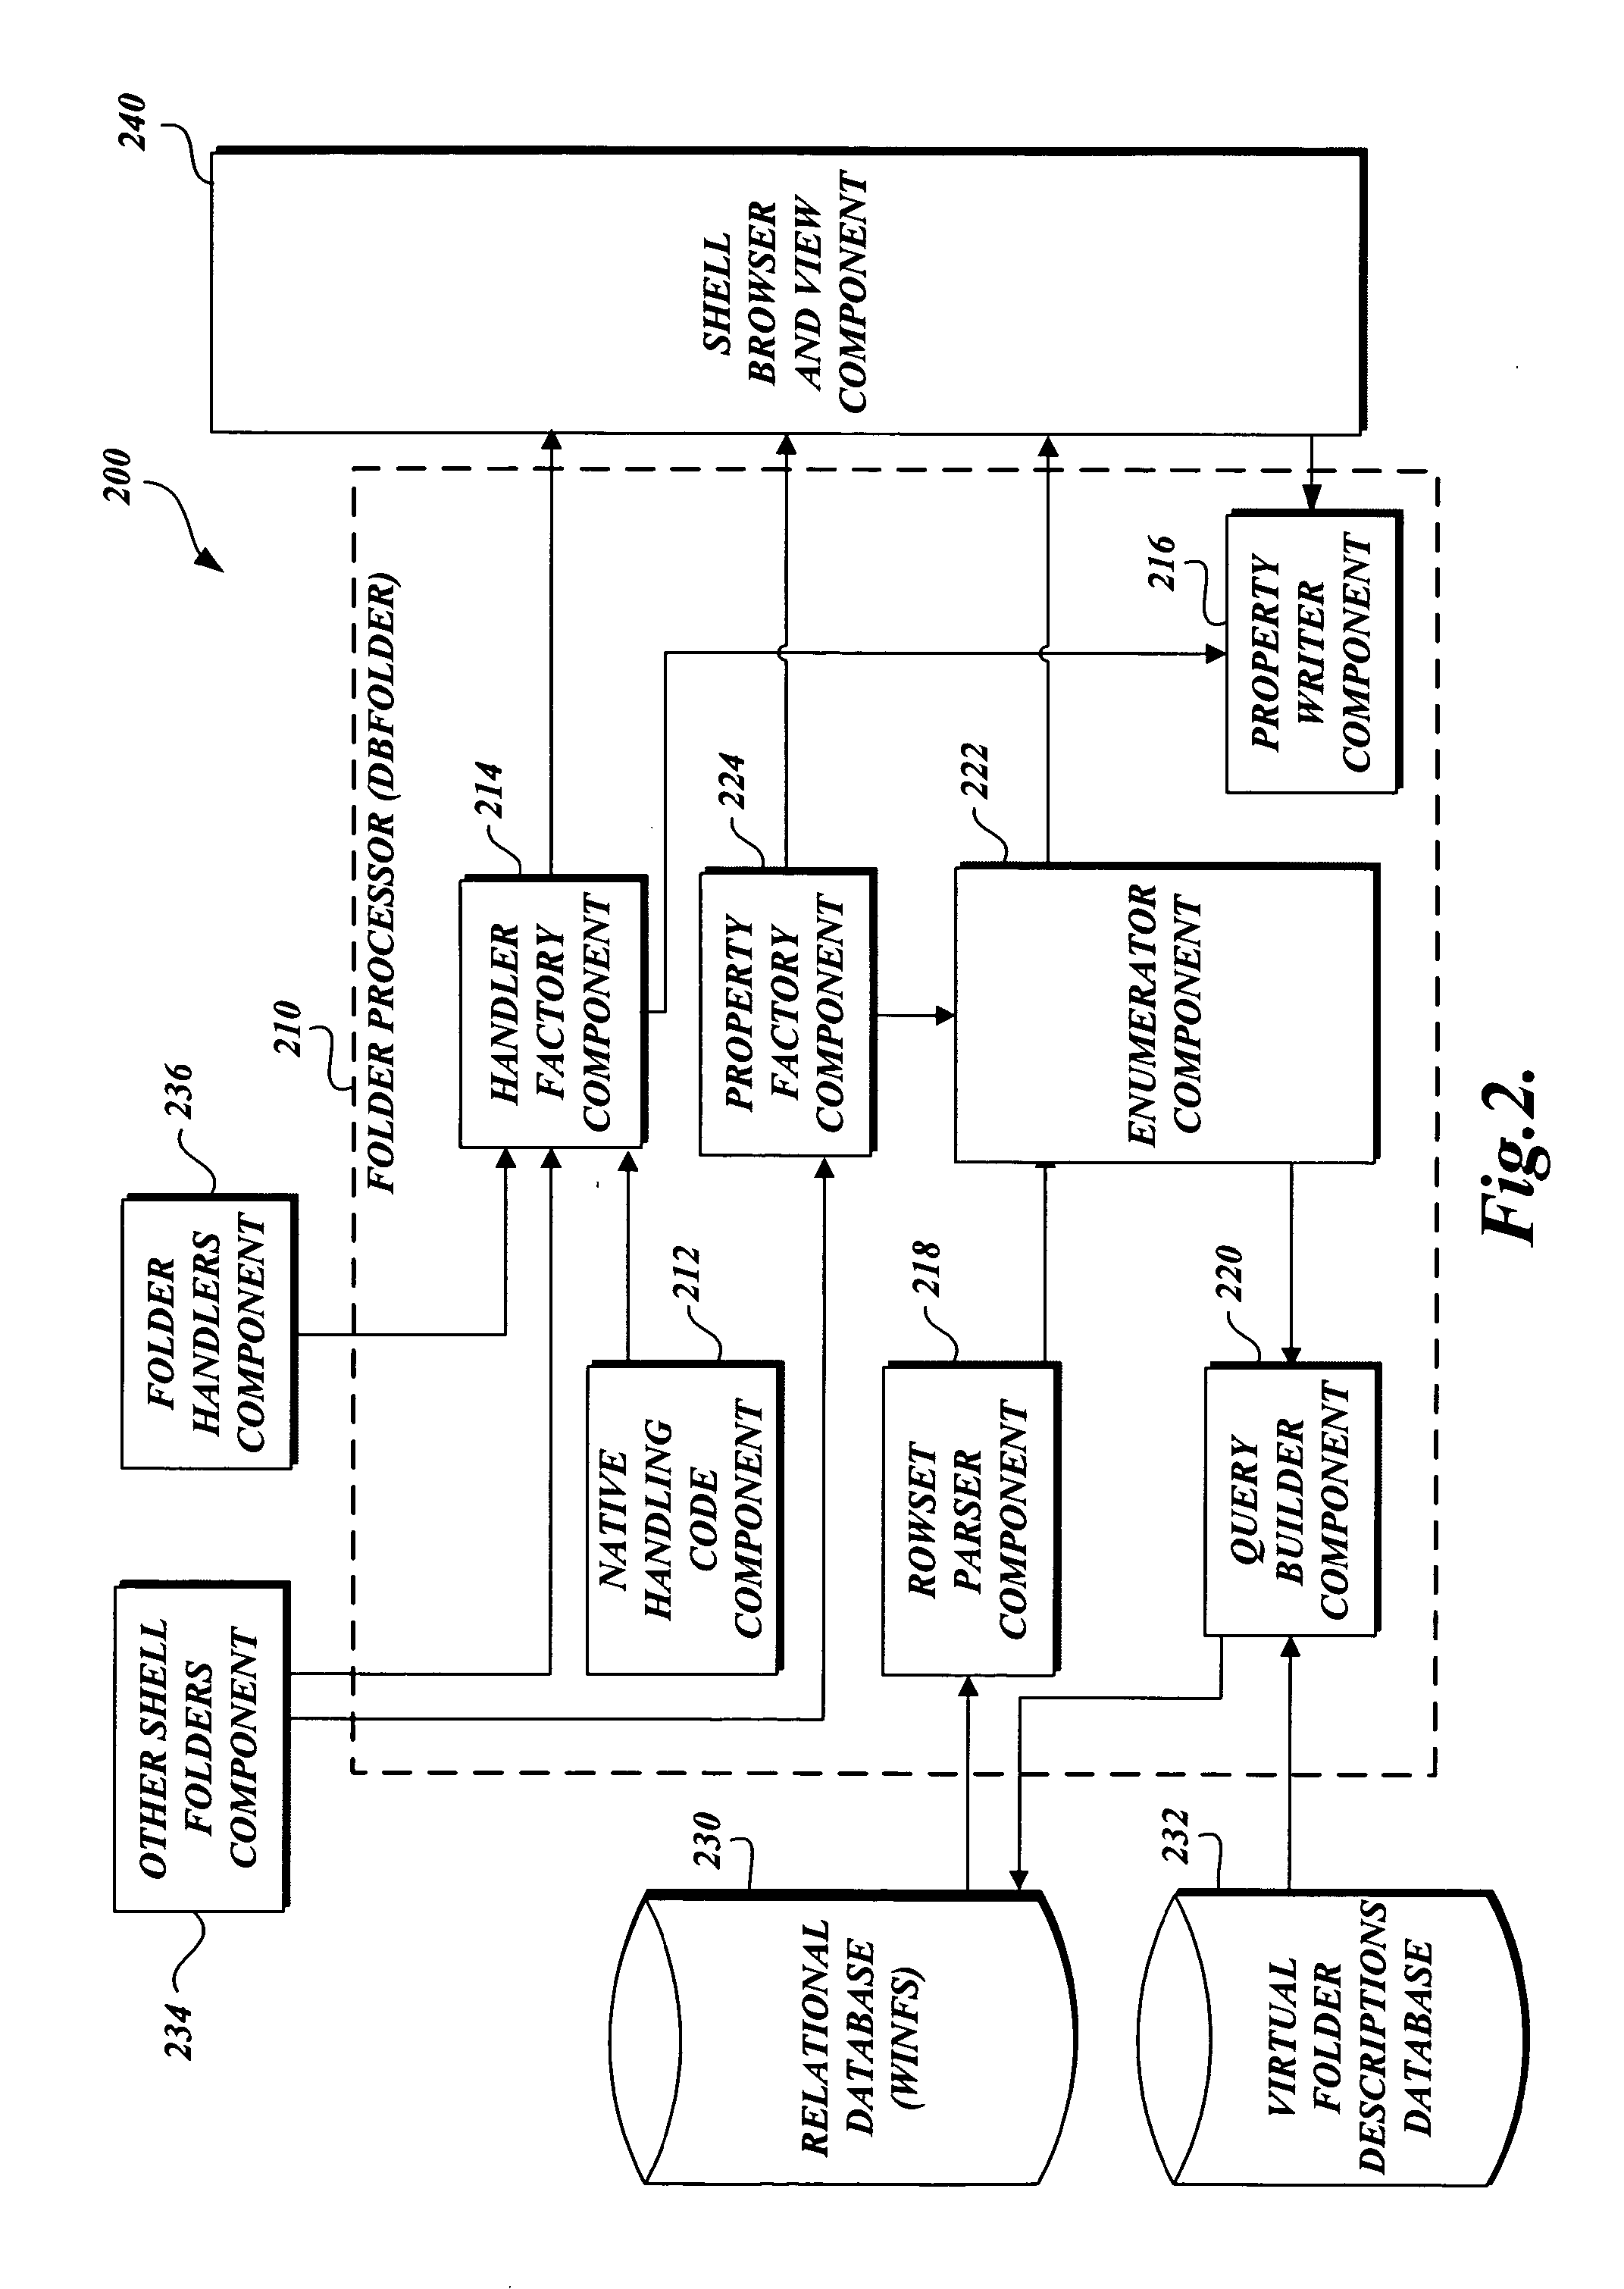 System and method for virtual folder sharing including utilization of static and dynamic lists